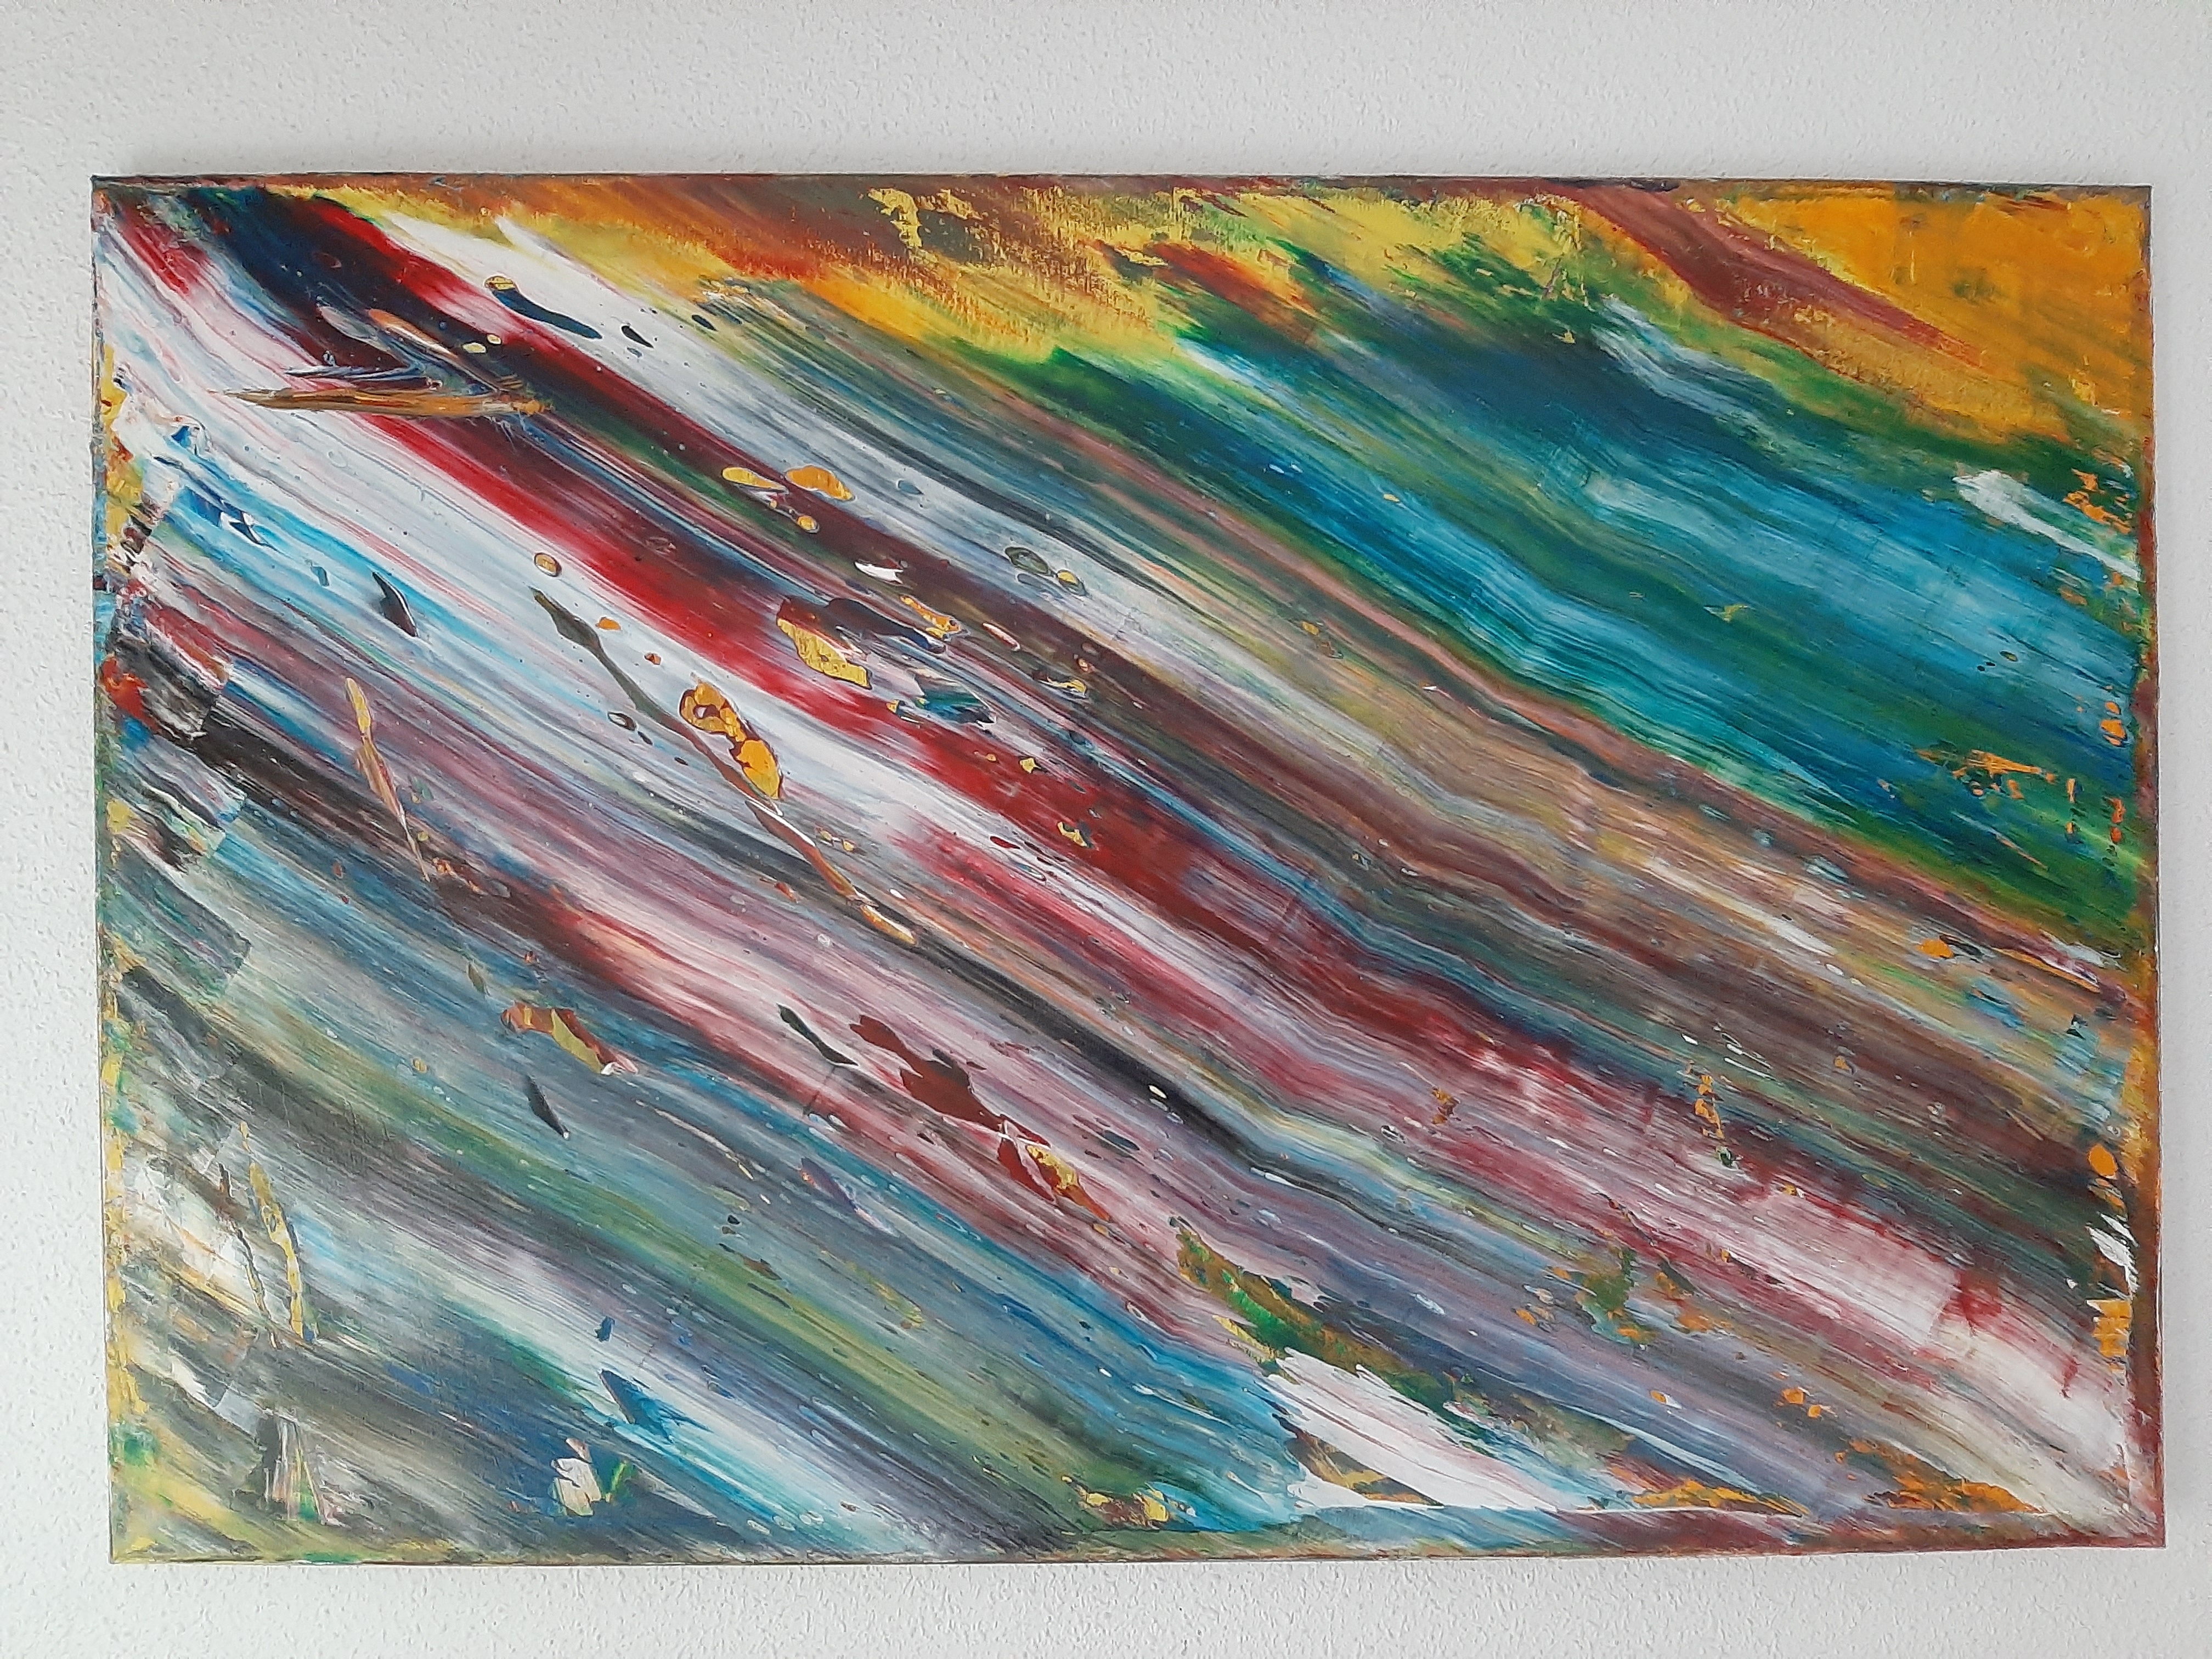 The Sounds of Color, 90x60 cm,